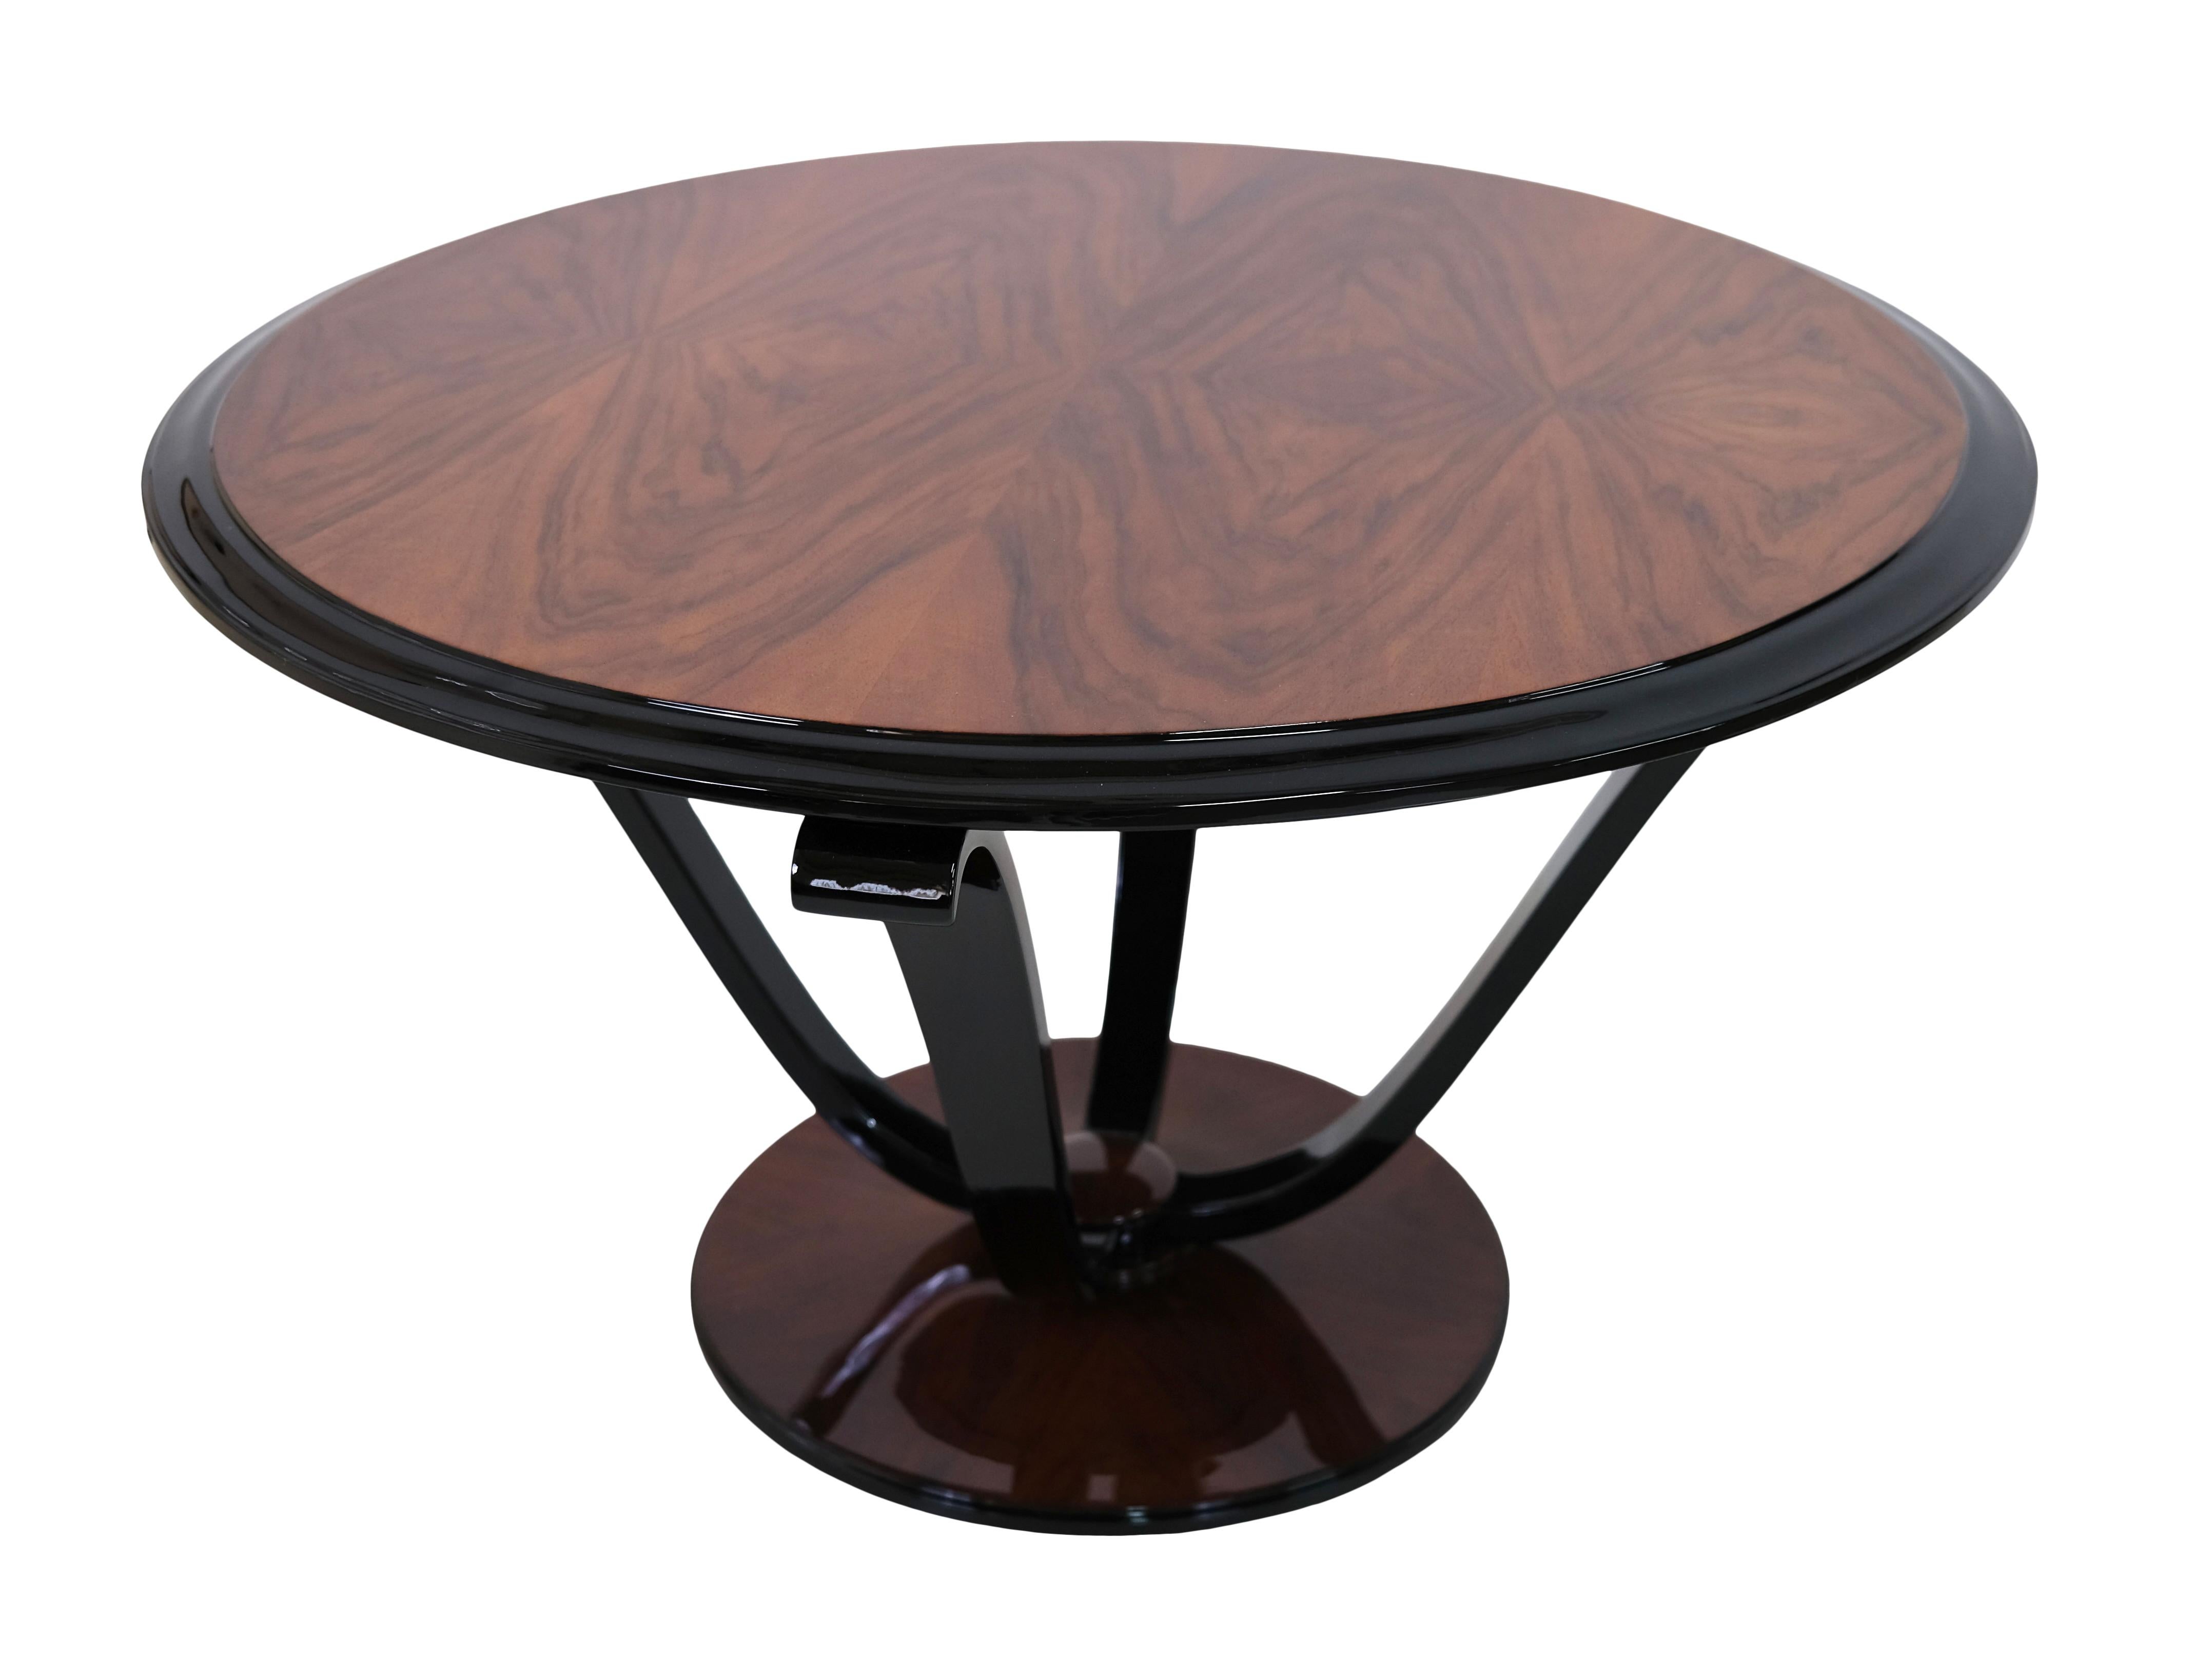 Blackened French 1930s Art Deco Side Table with Nutwood Veneer and Black Lacquer